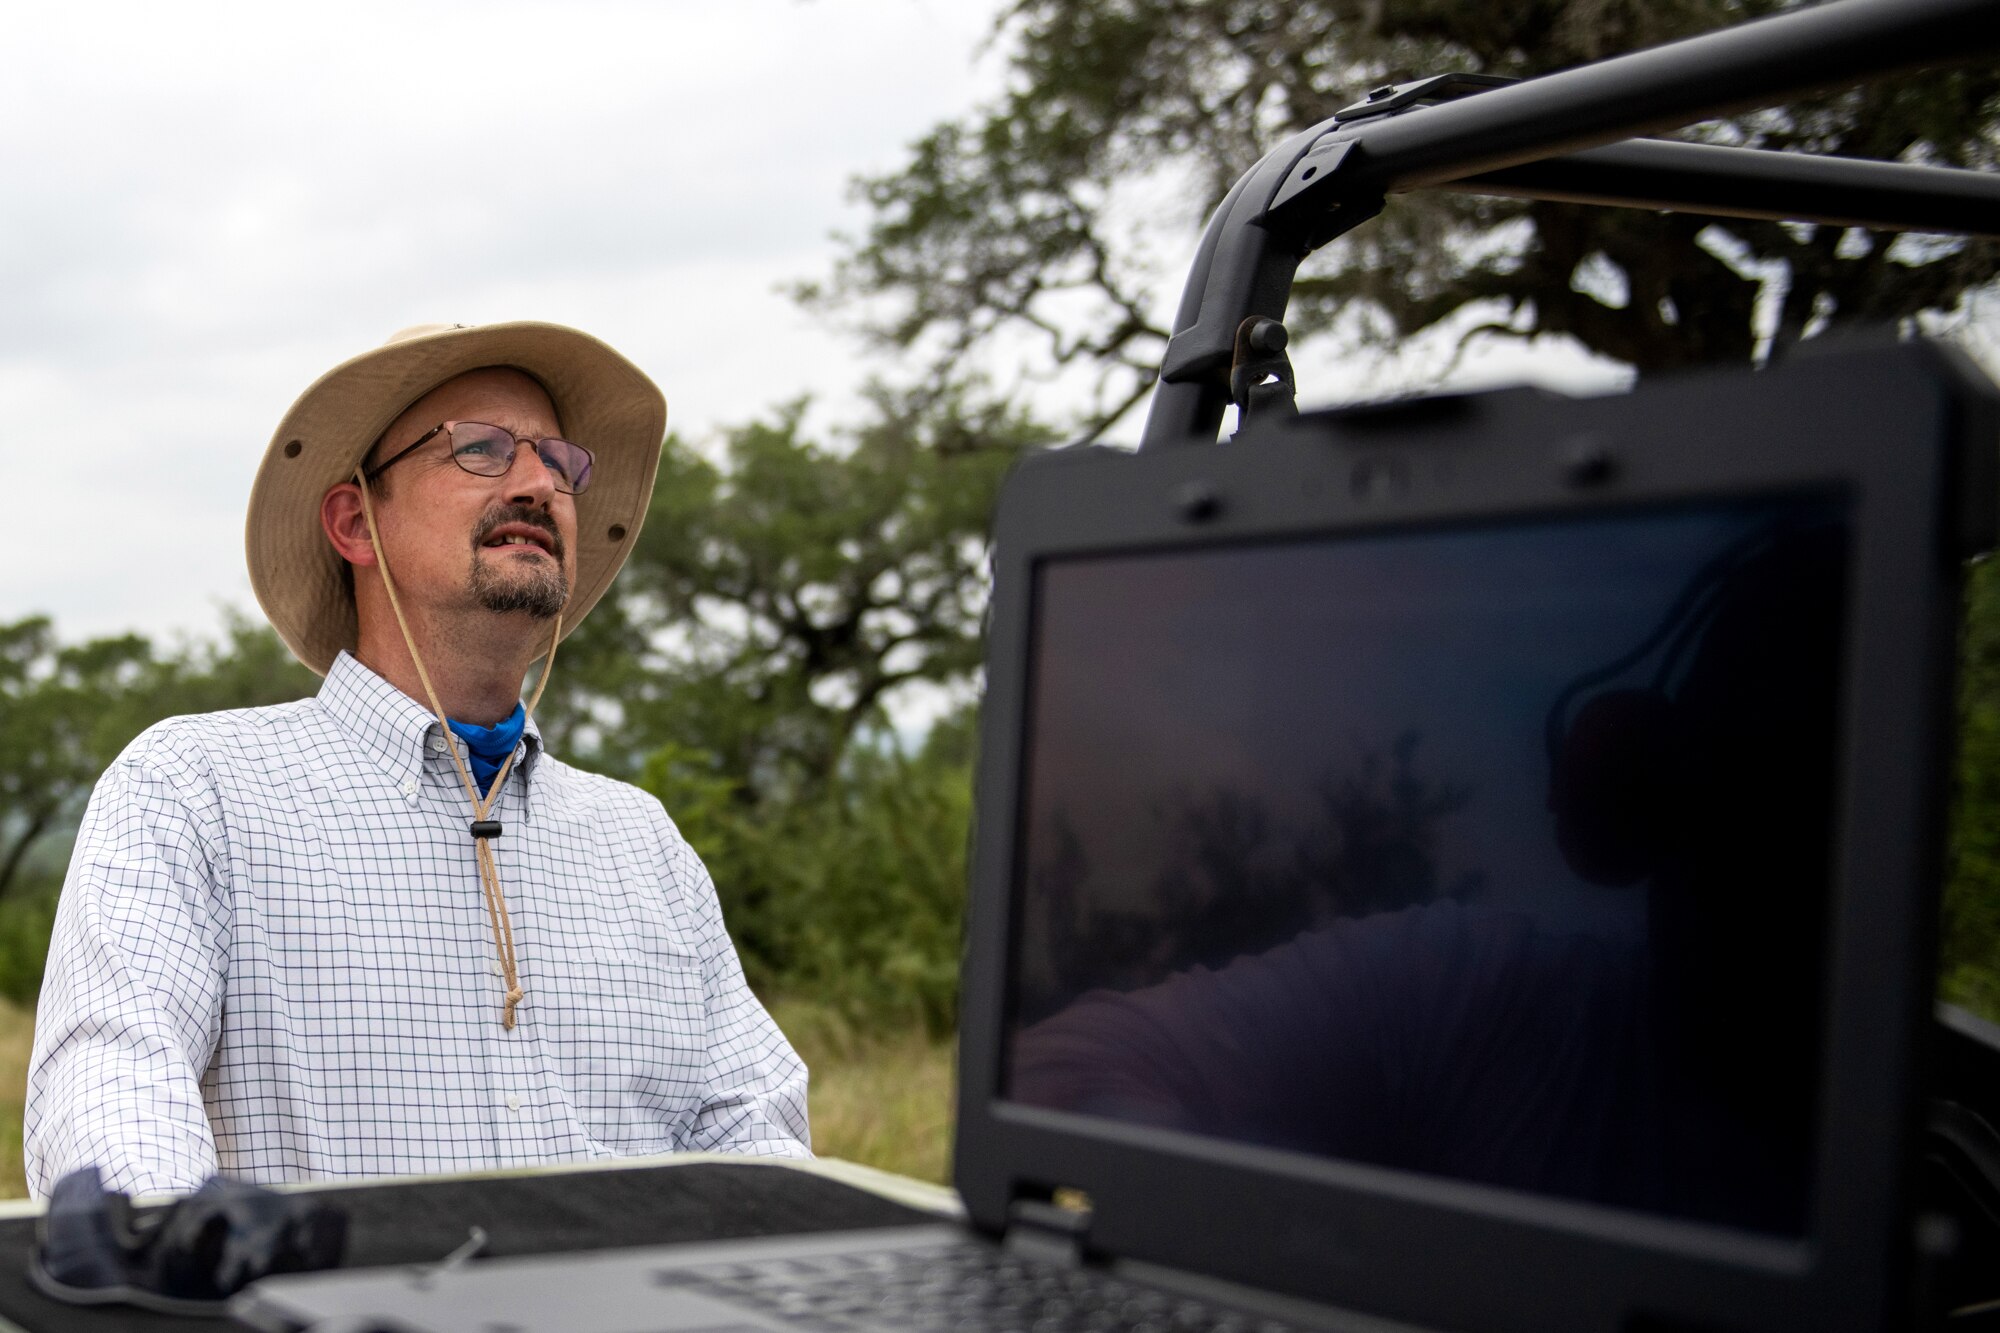 Paul Jurena, Air Force Civil Engineer Center natural resources specialist, watches as an unmanned aerial system flies during a test flight July 9, 2020, at Joint Base San Antonio-Camp Bullis, Texas.